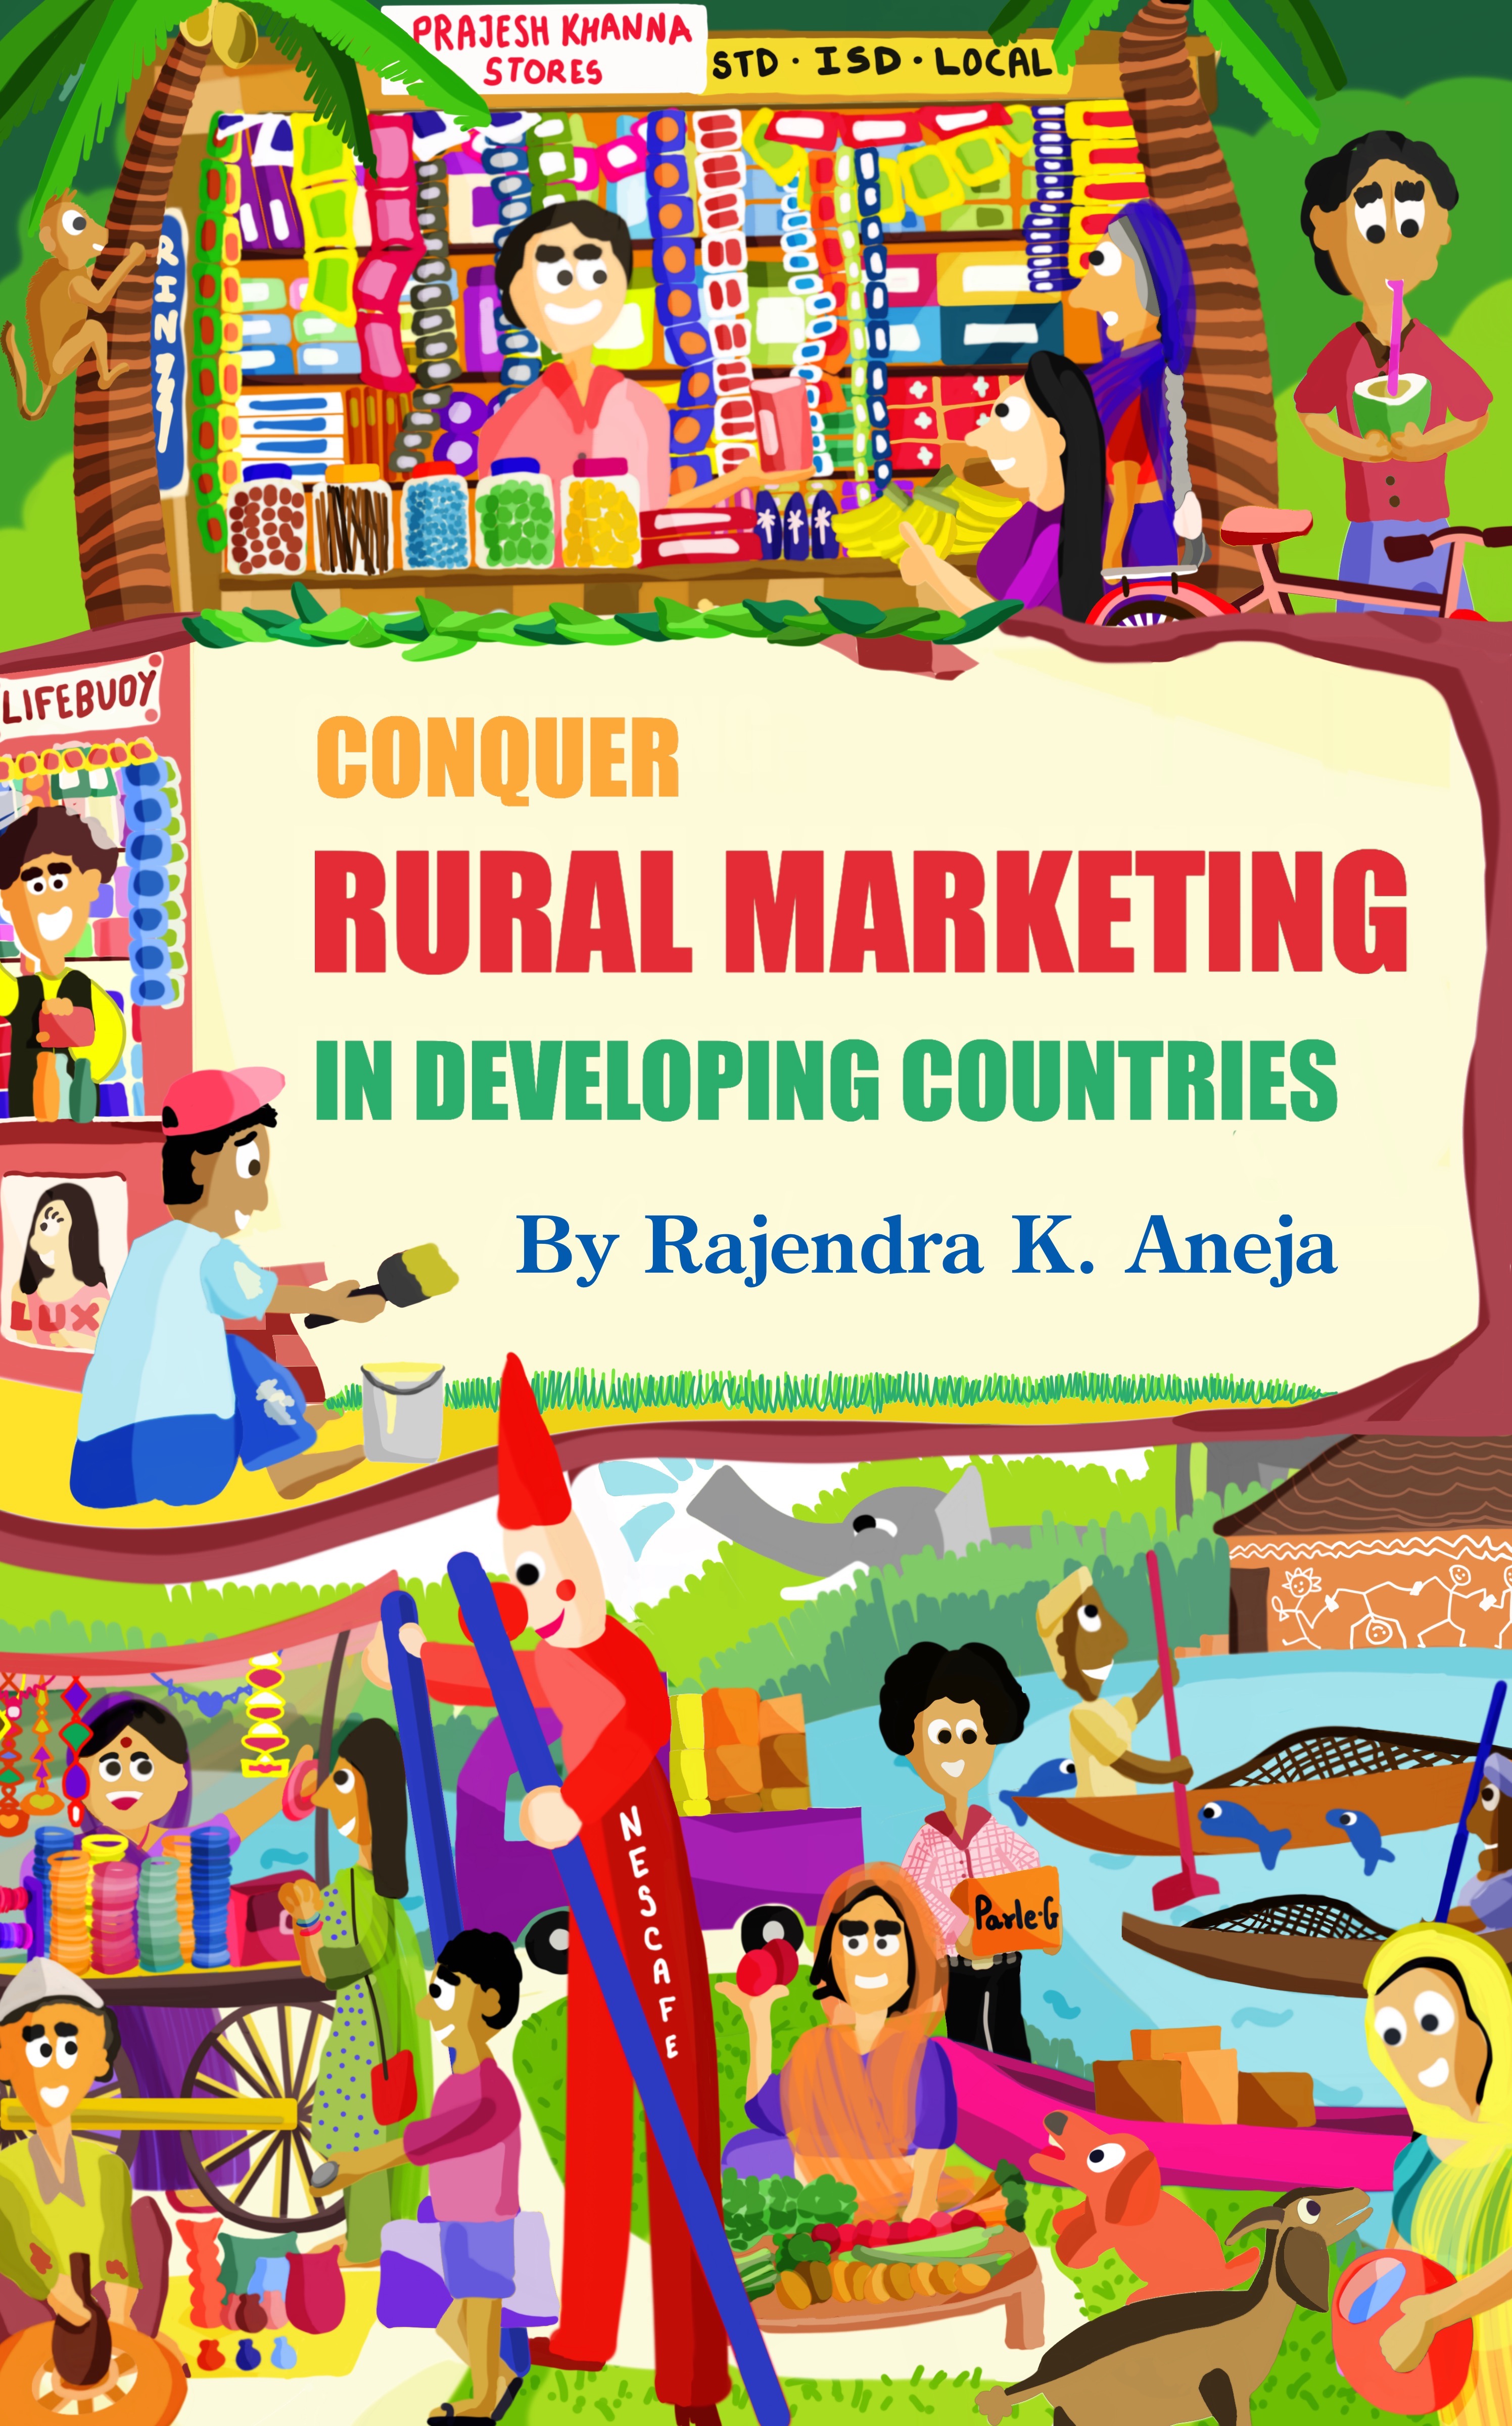 Conquer Rural Marketing in Developing countries - 29 August 2017 JPEG 2